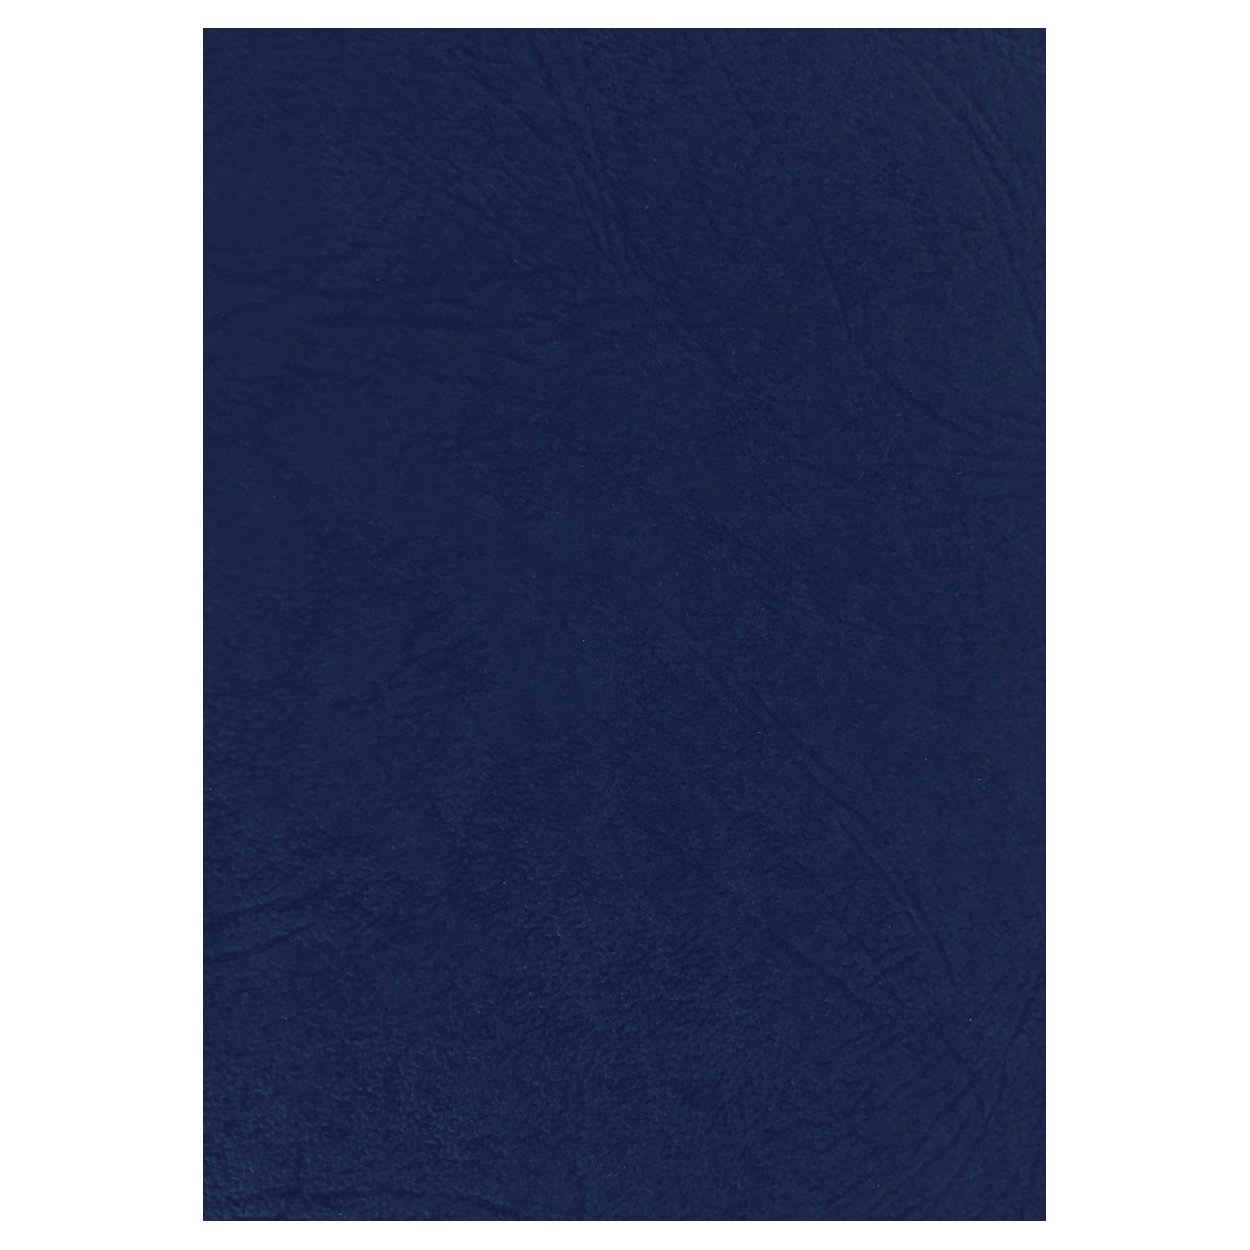 A4 Leathergrain Covers 250gsm - Royal Blue (Pkt 100) - Click Image to Close